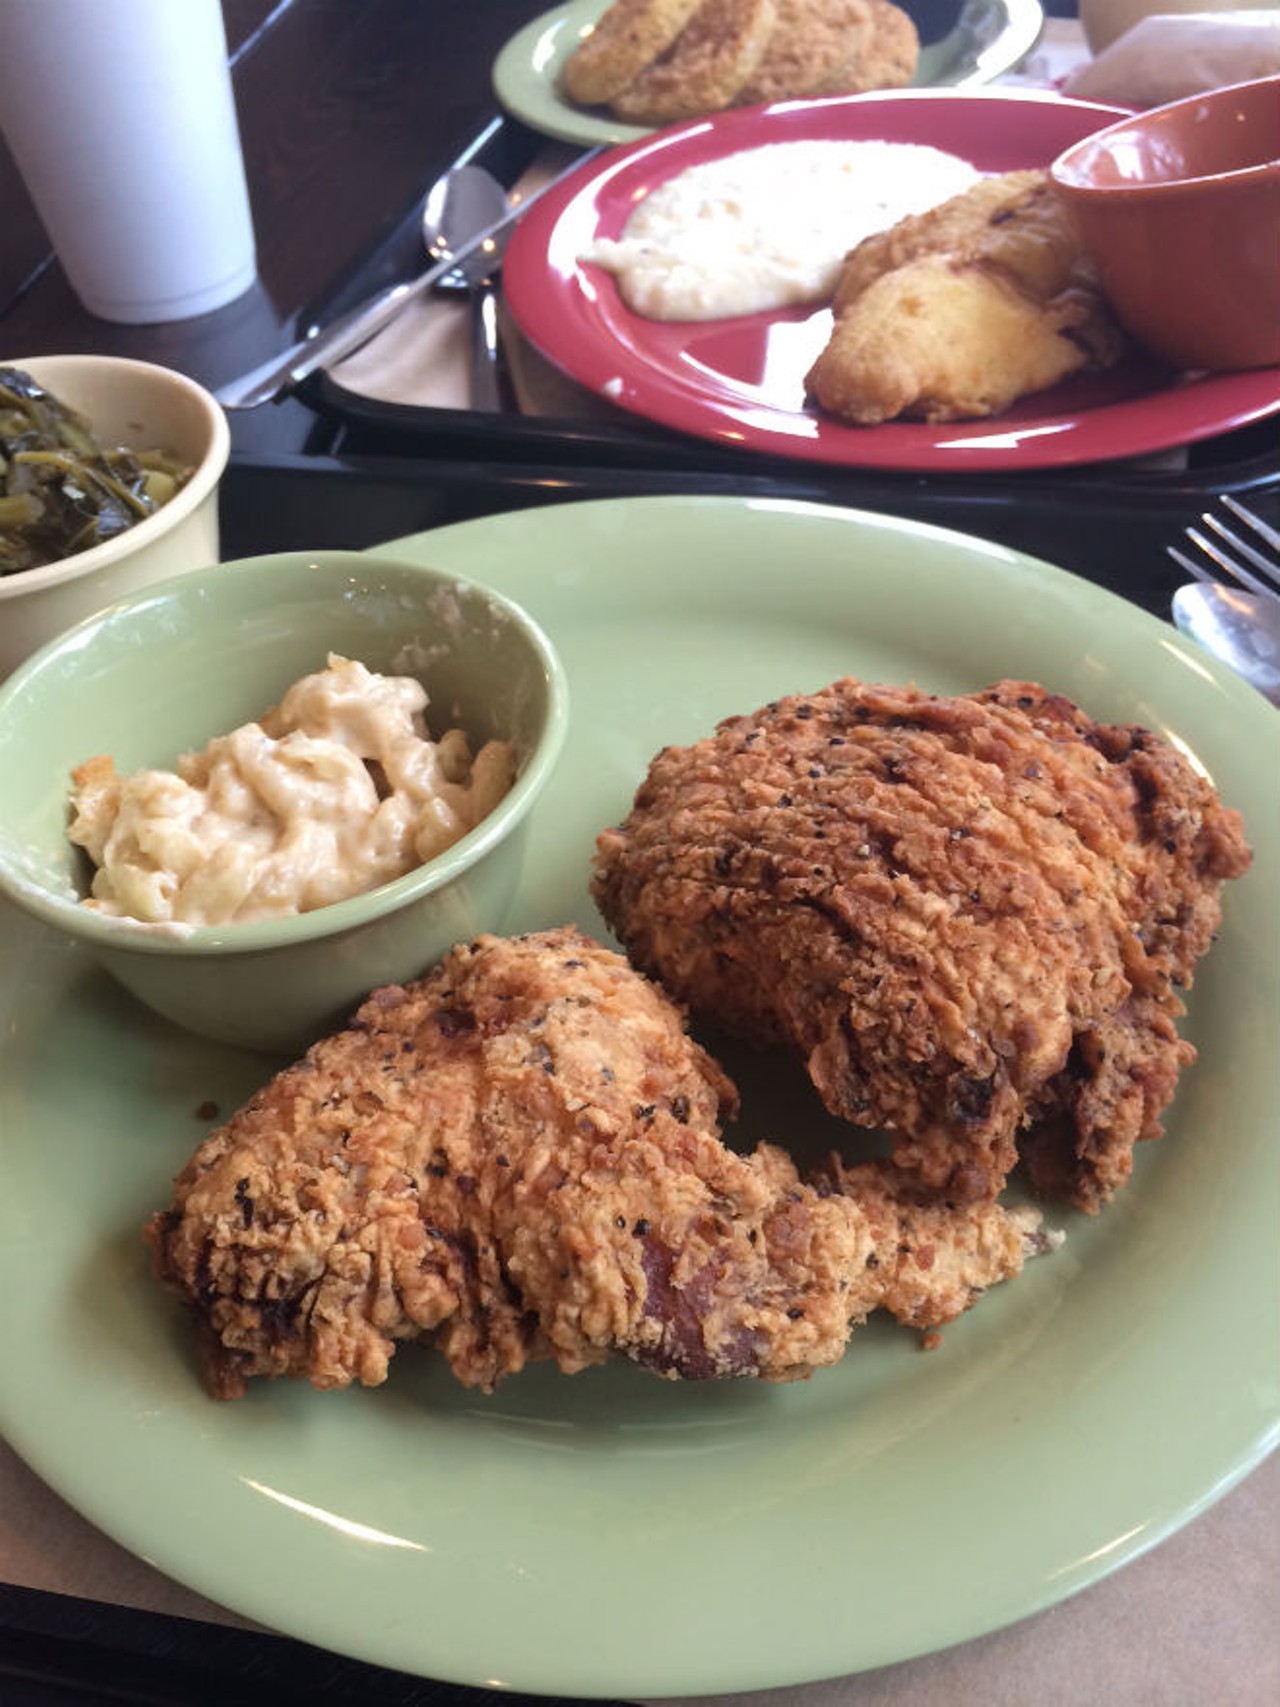 Fried chicken and mac n' cheese.